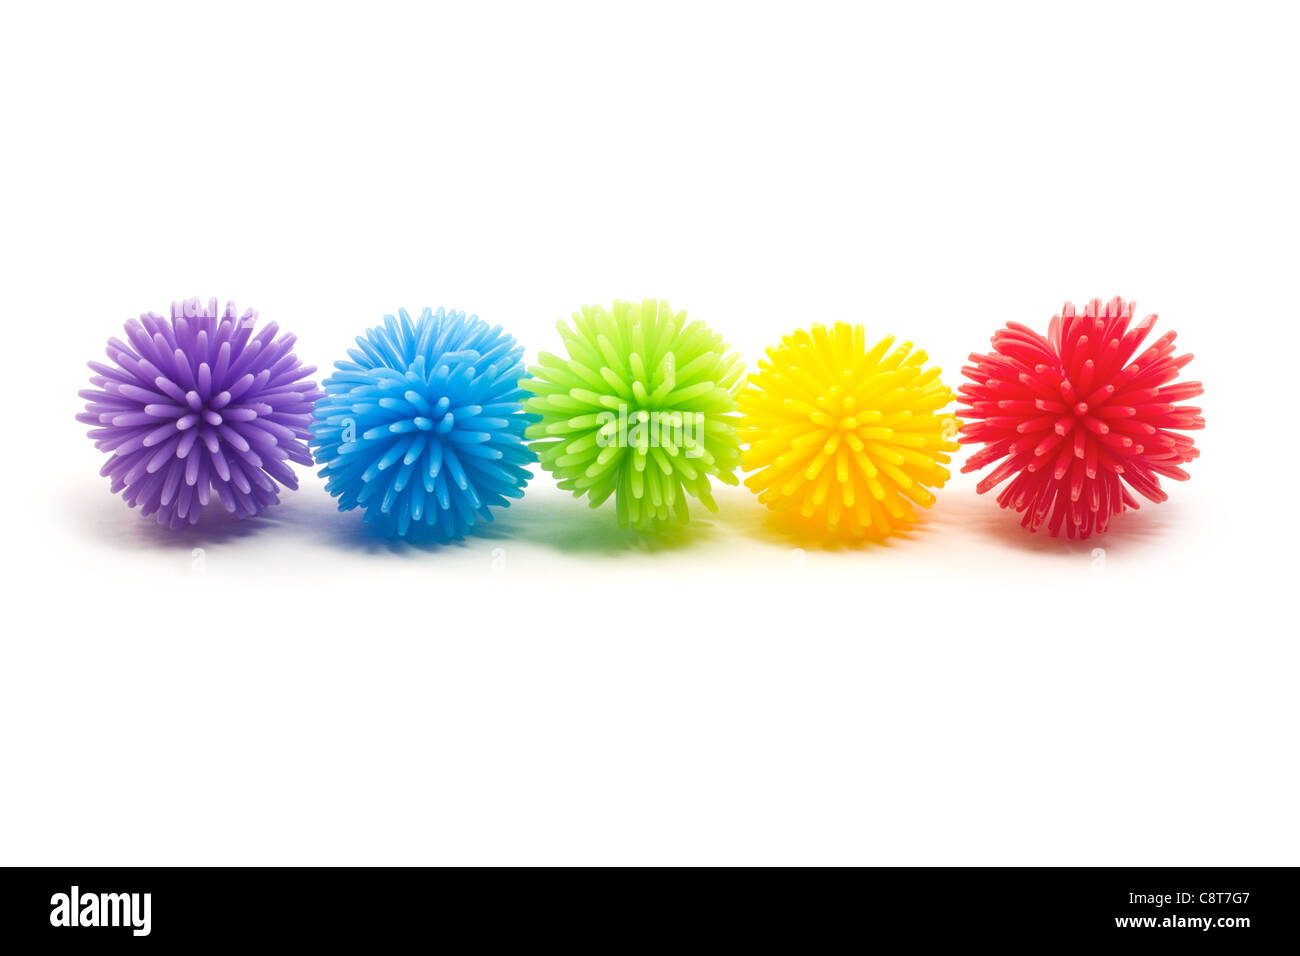 Five colorful Koosh stress balls in a line. Colors include purple, blue, green, yellow, and red. Stock Photo